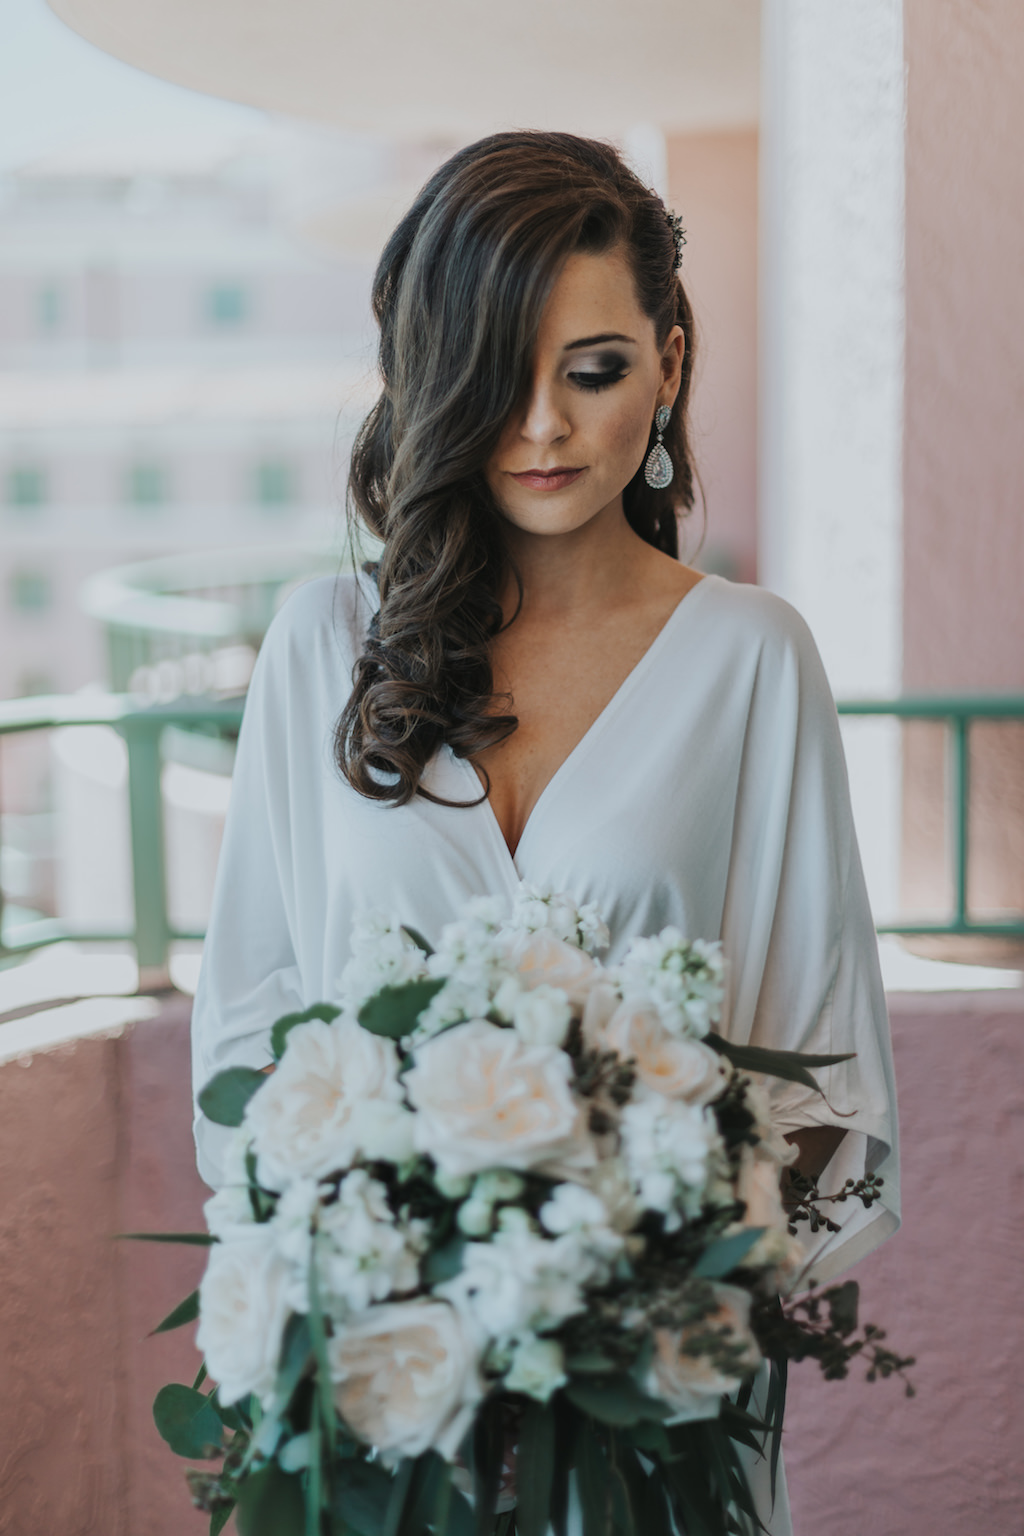 Bride Getting Ready Portrait in Silk Robe with Drop Glam Earring and Blush Pink White, and Greenery Wedding Bouquet